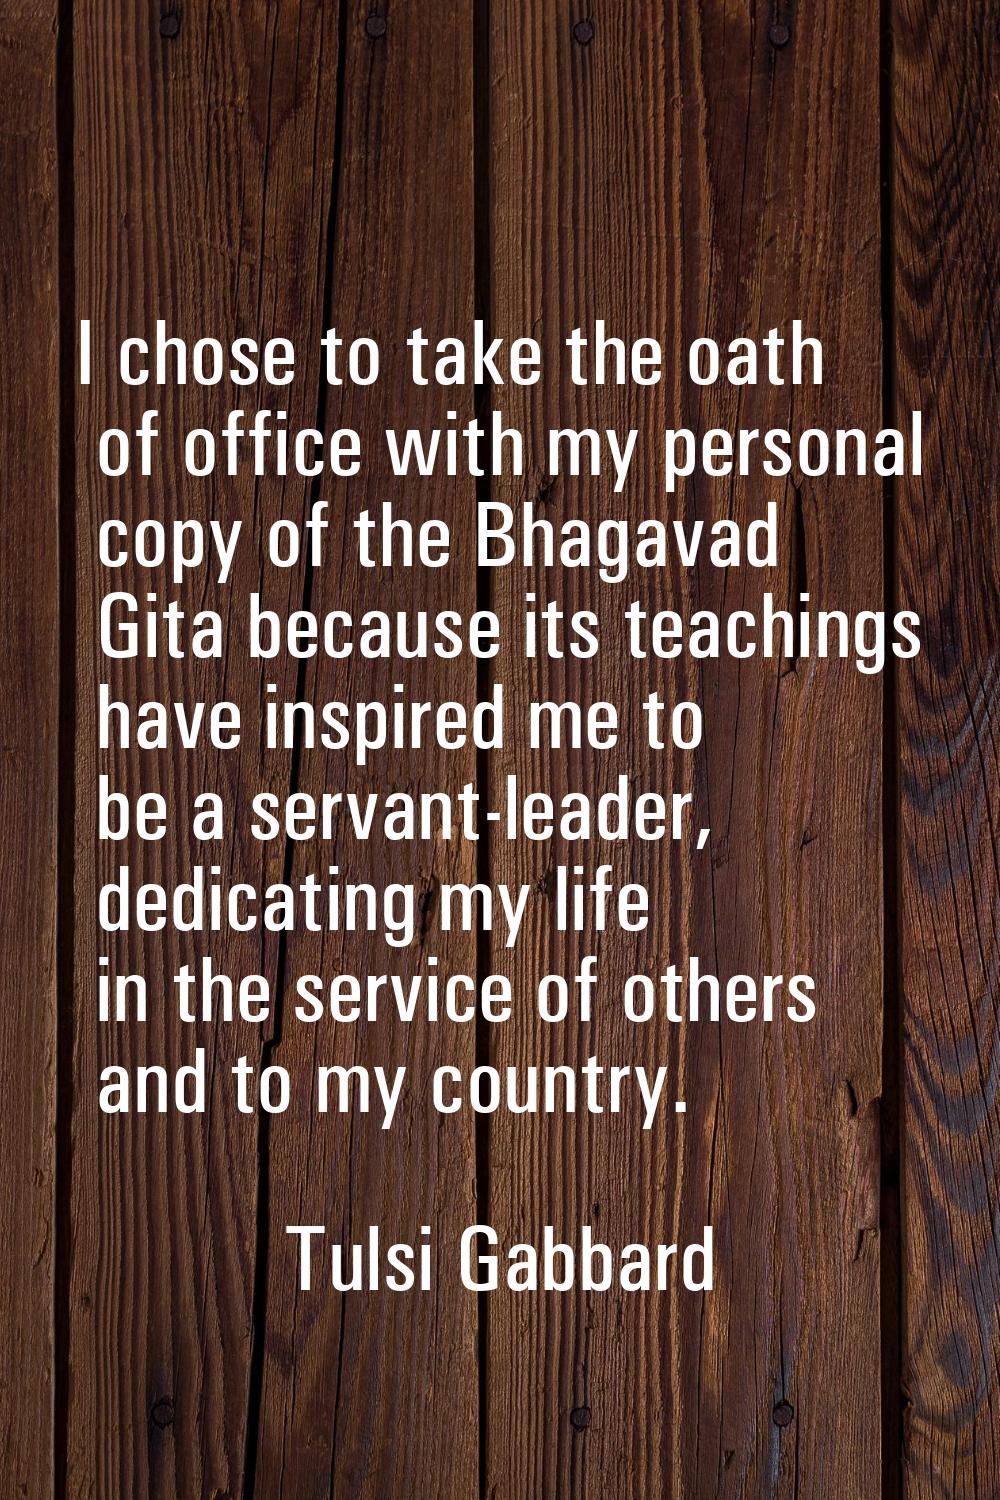 I chose to take the oath of office with my personal copy of the Bhagavad Gita because its teachings